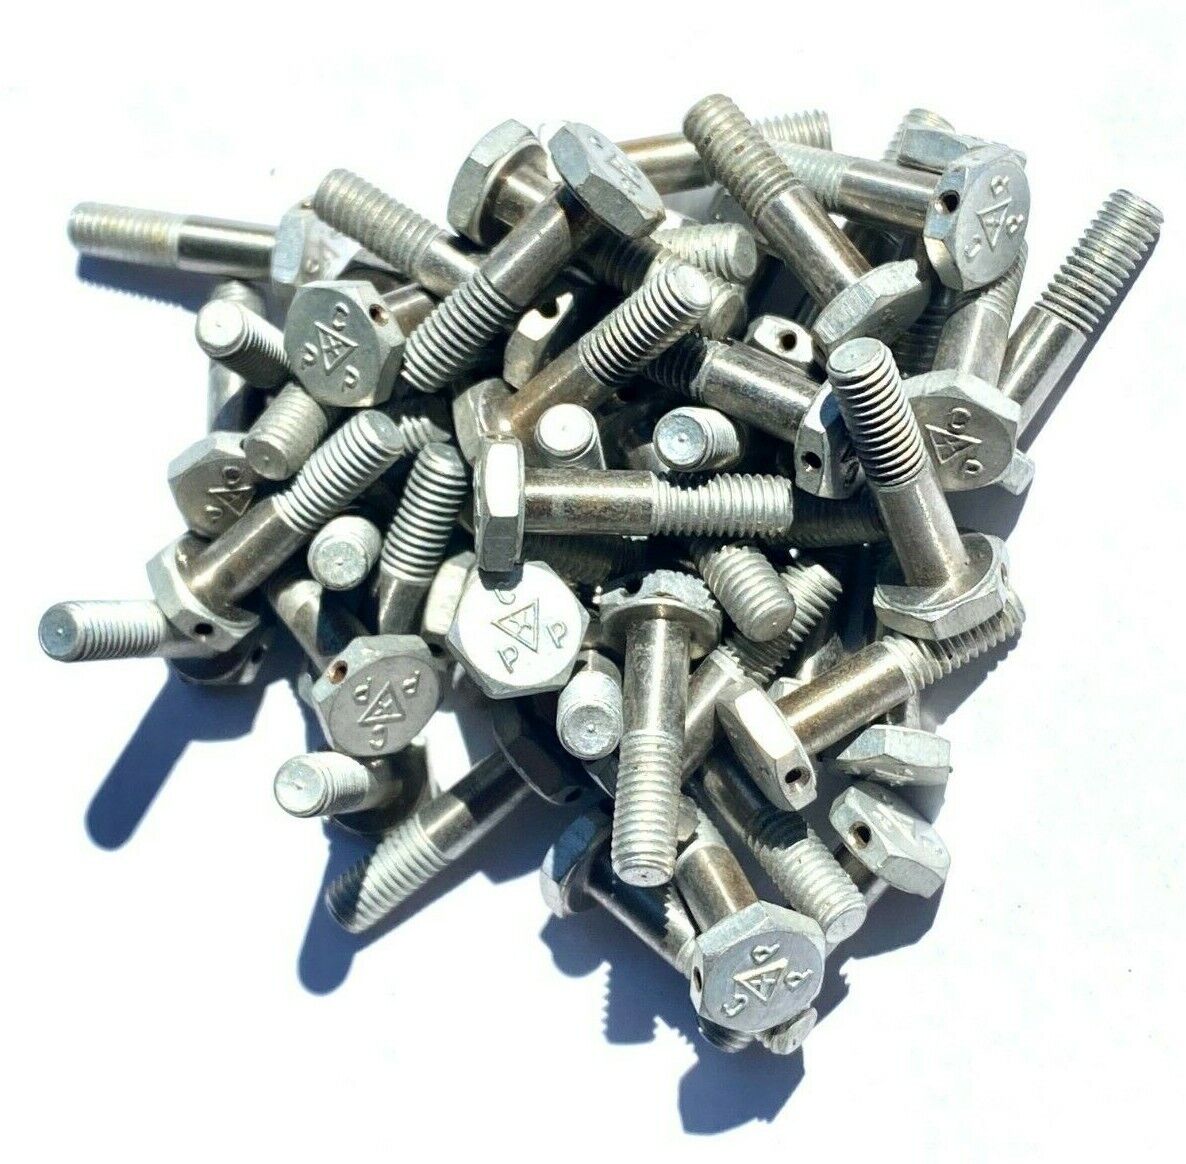 lot of 50 drilled head steel bolts 10-32 3/4 long aircraft USA